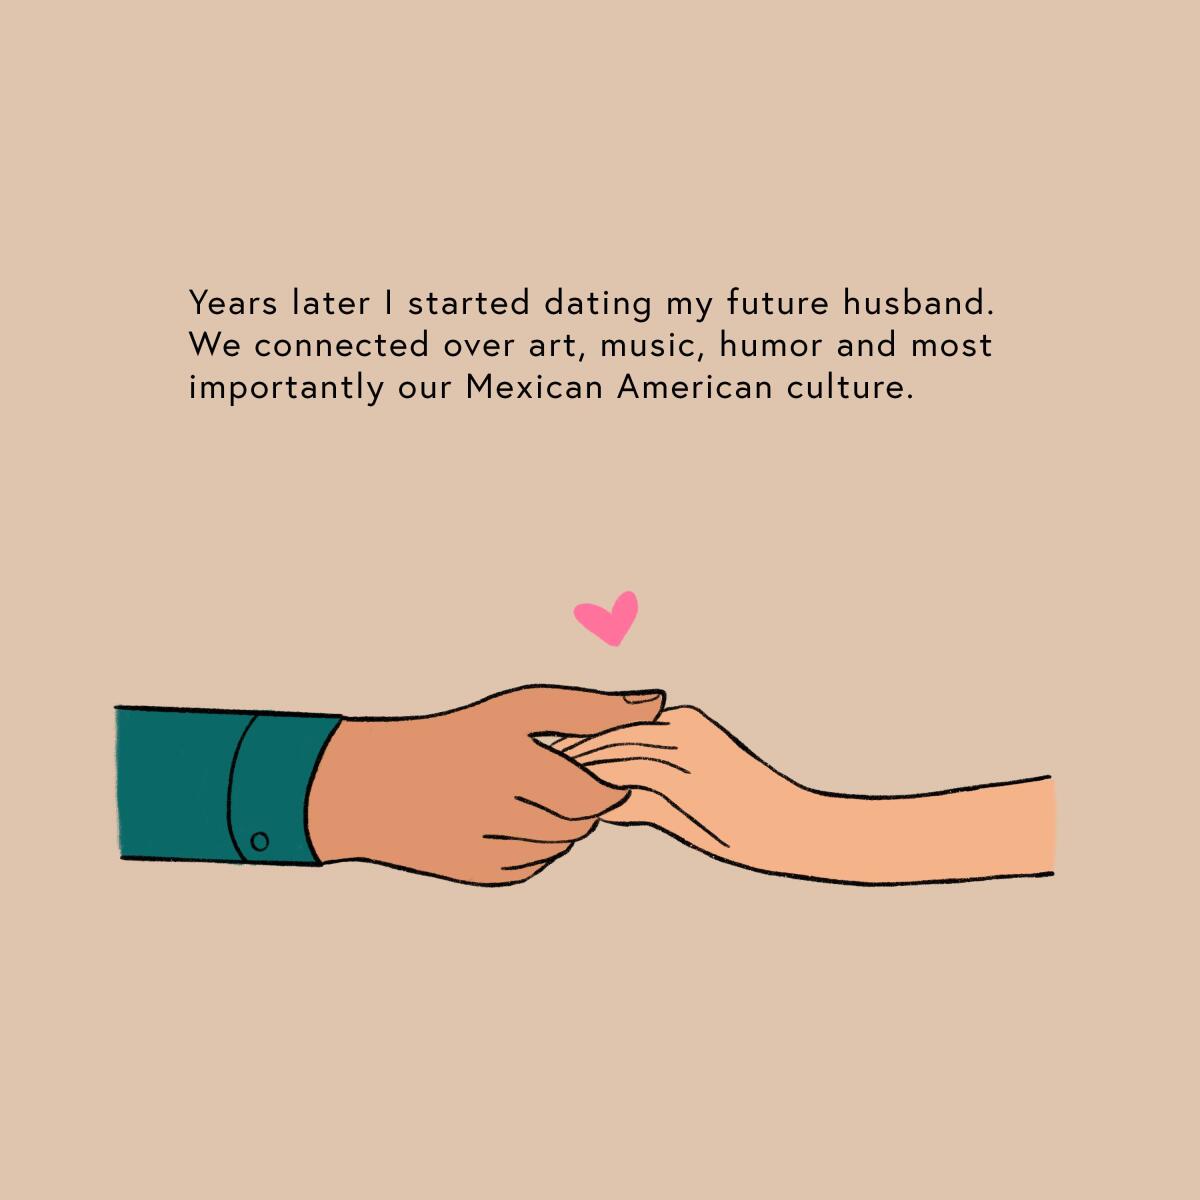 Years later i started dating my future husband. We connected over our Mexican American culture. 